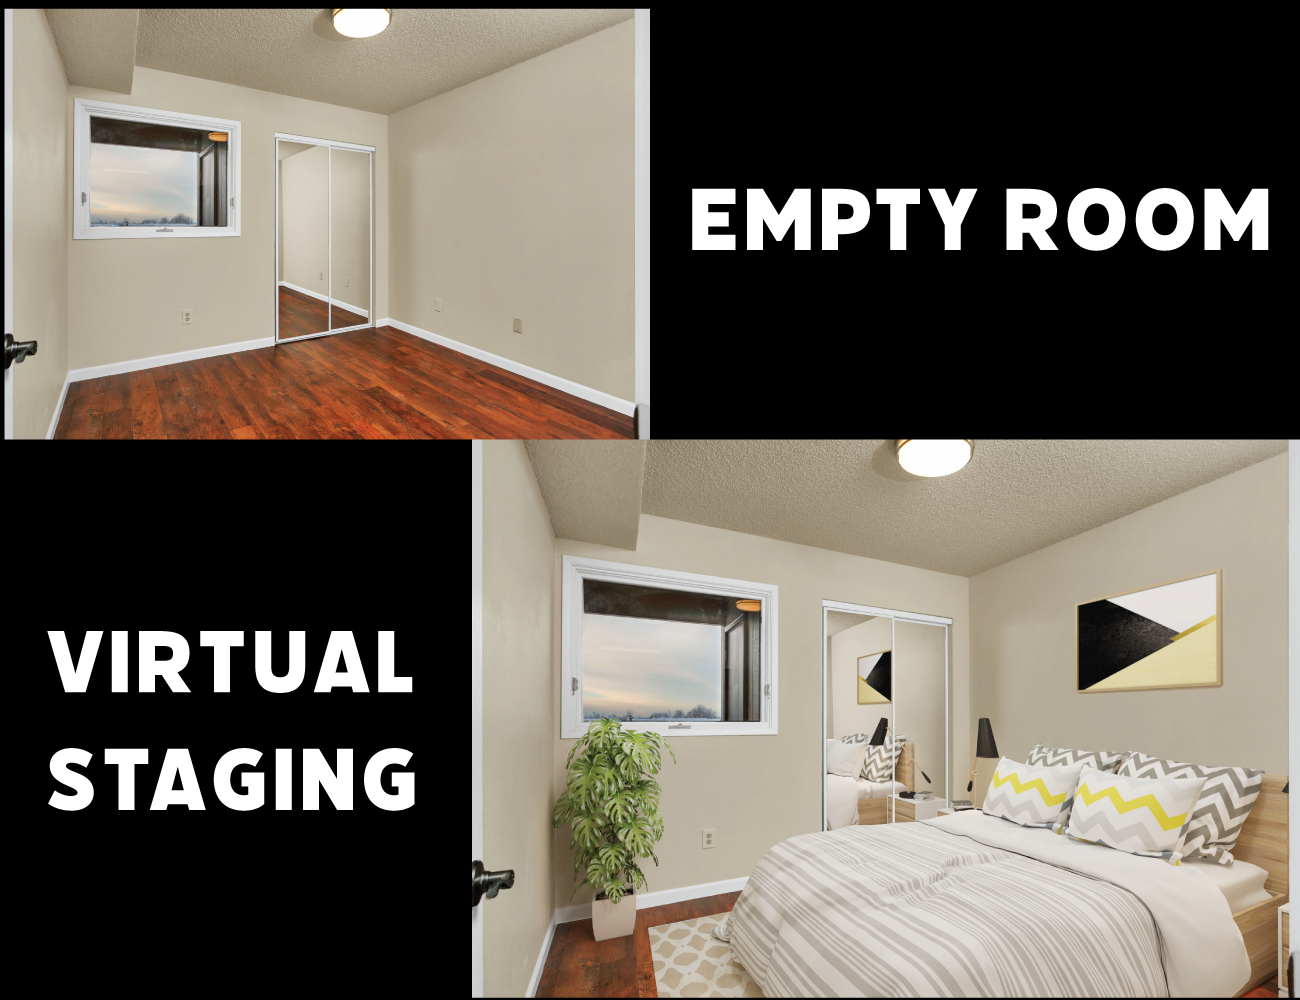 Before and after photographs of a virtually staged property interior.